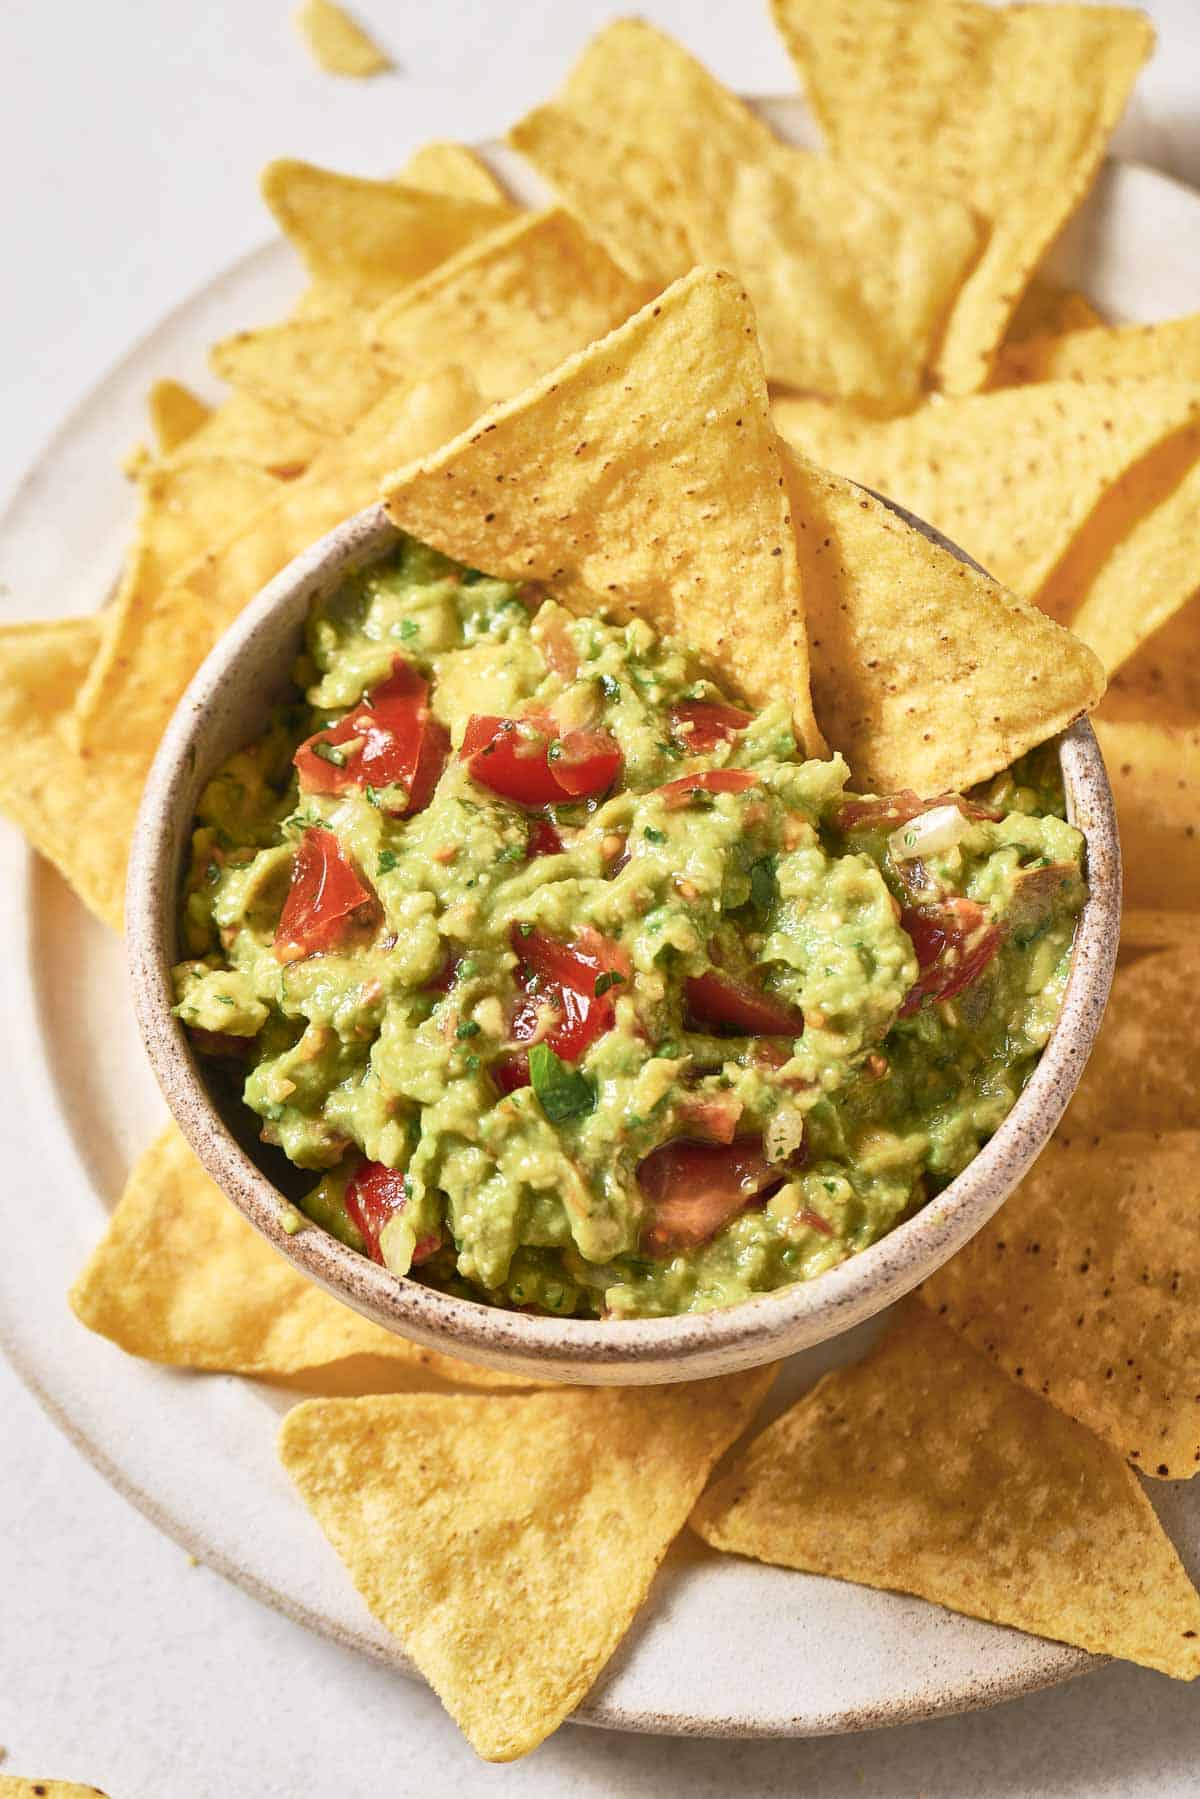 A bowl of 4-ingredient guacamole and chips on a plate.